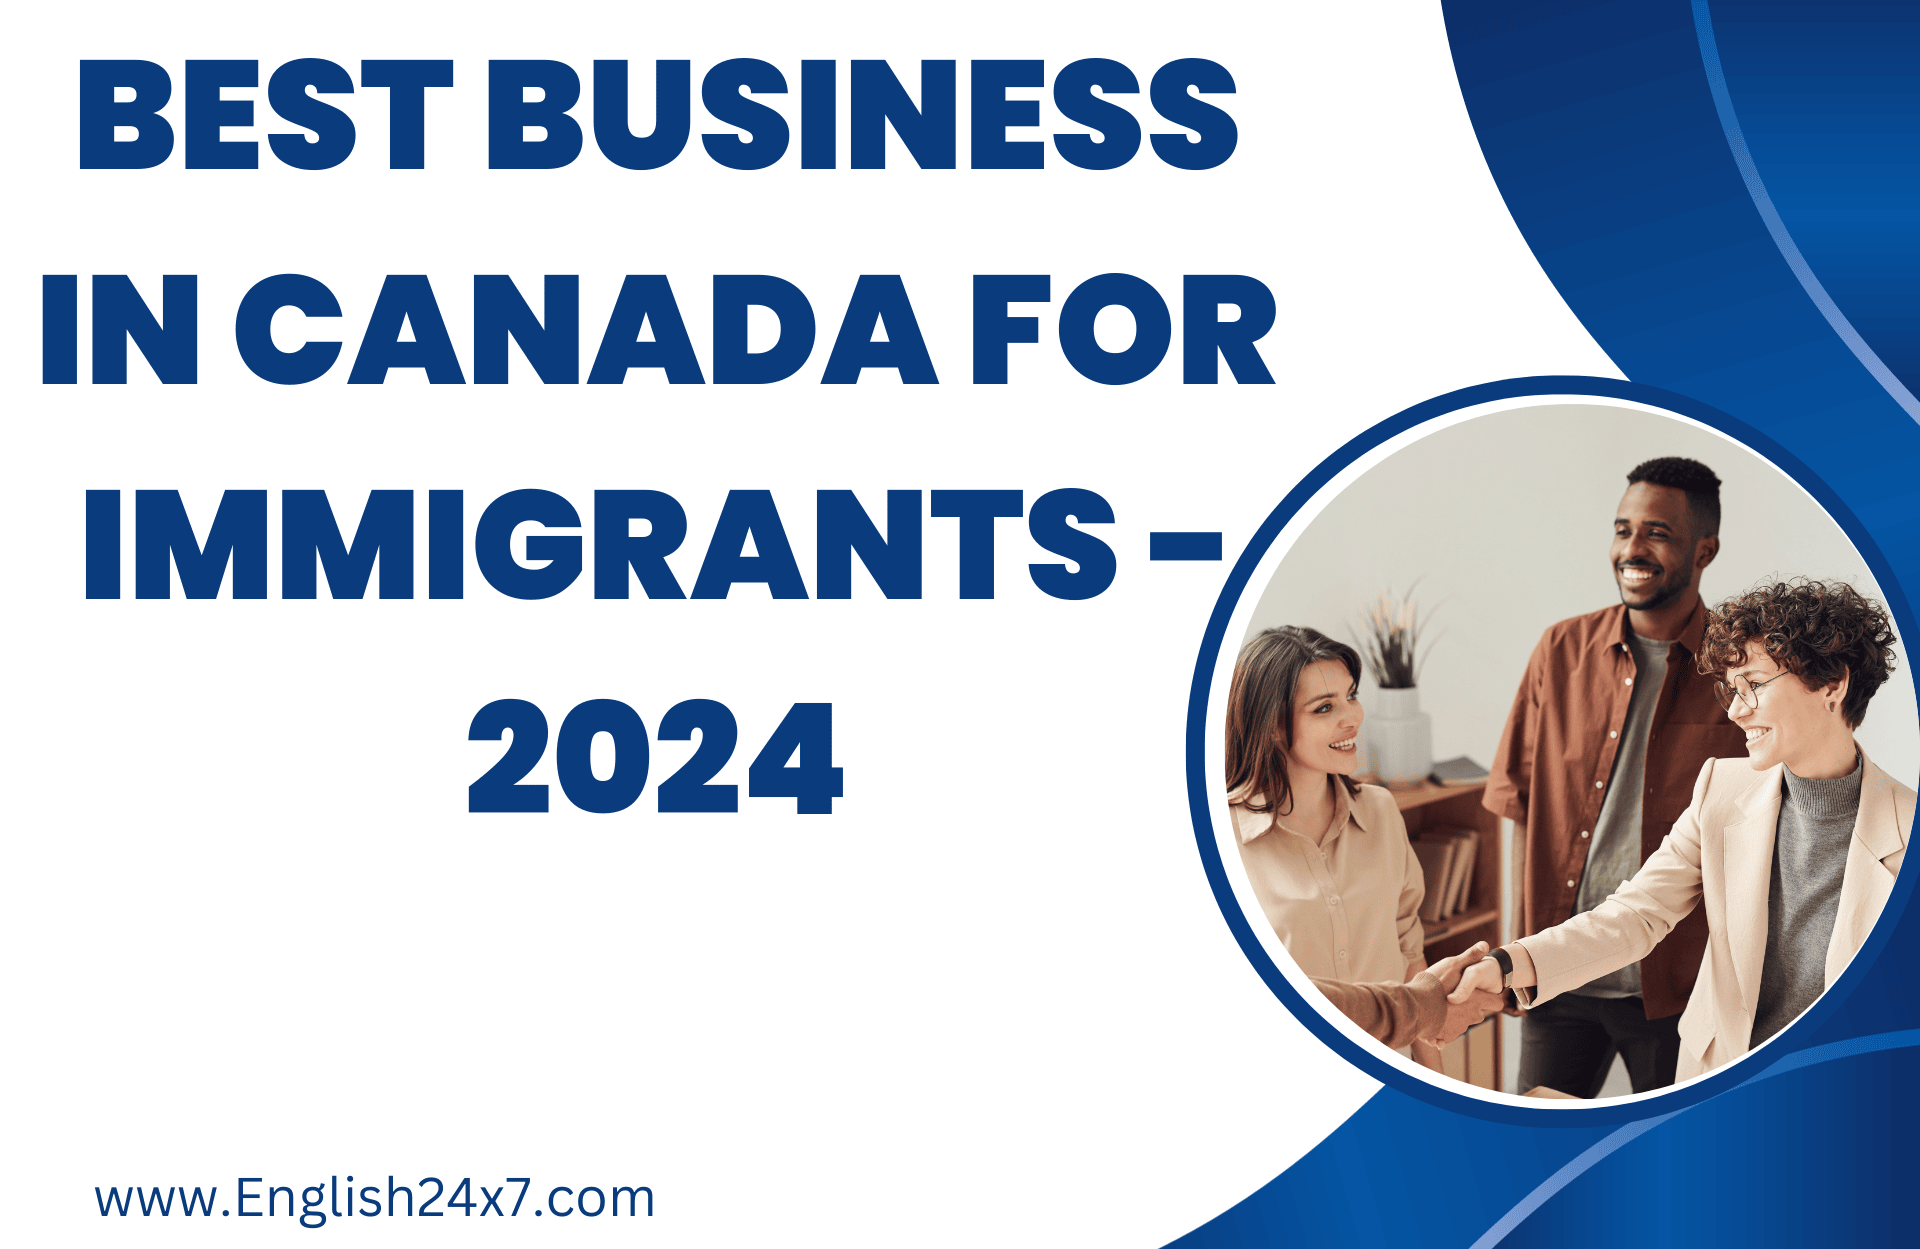 Best Business in Canada for Immigrants – 2024